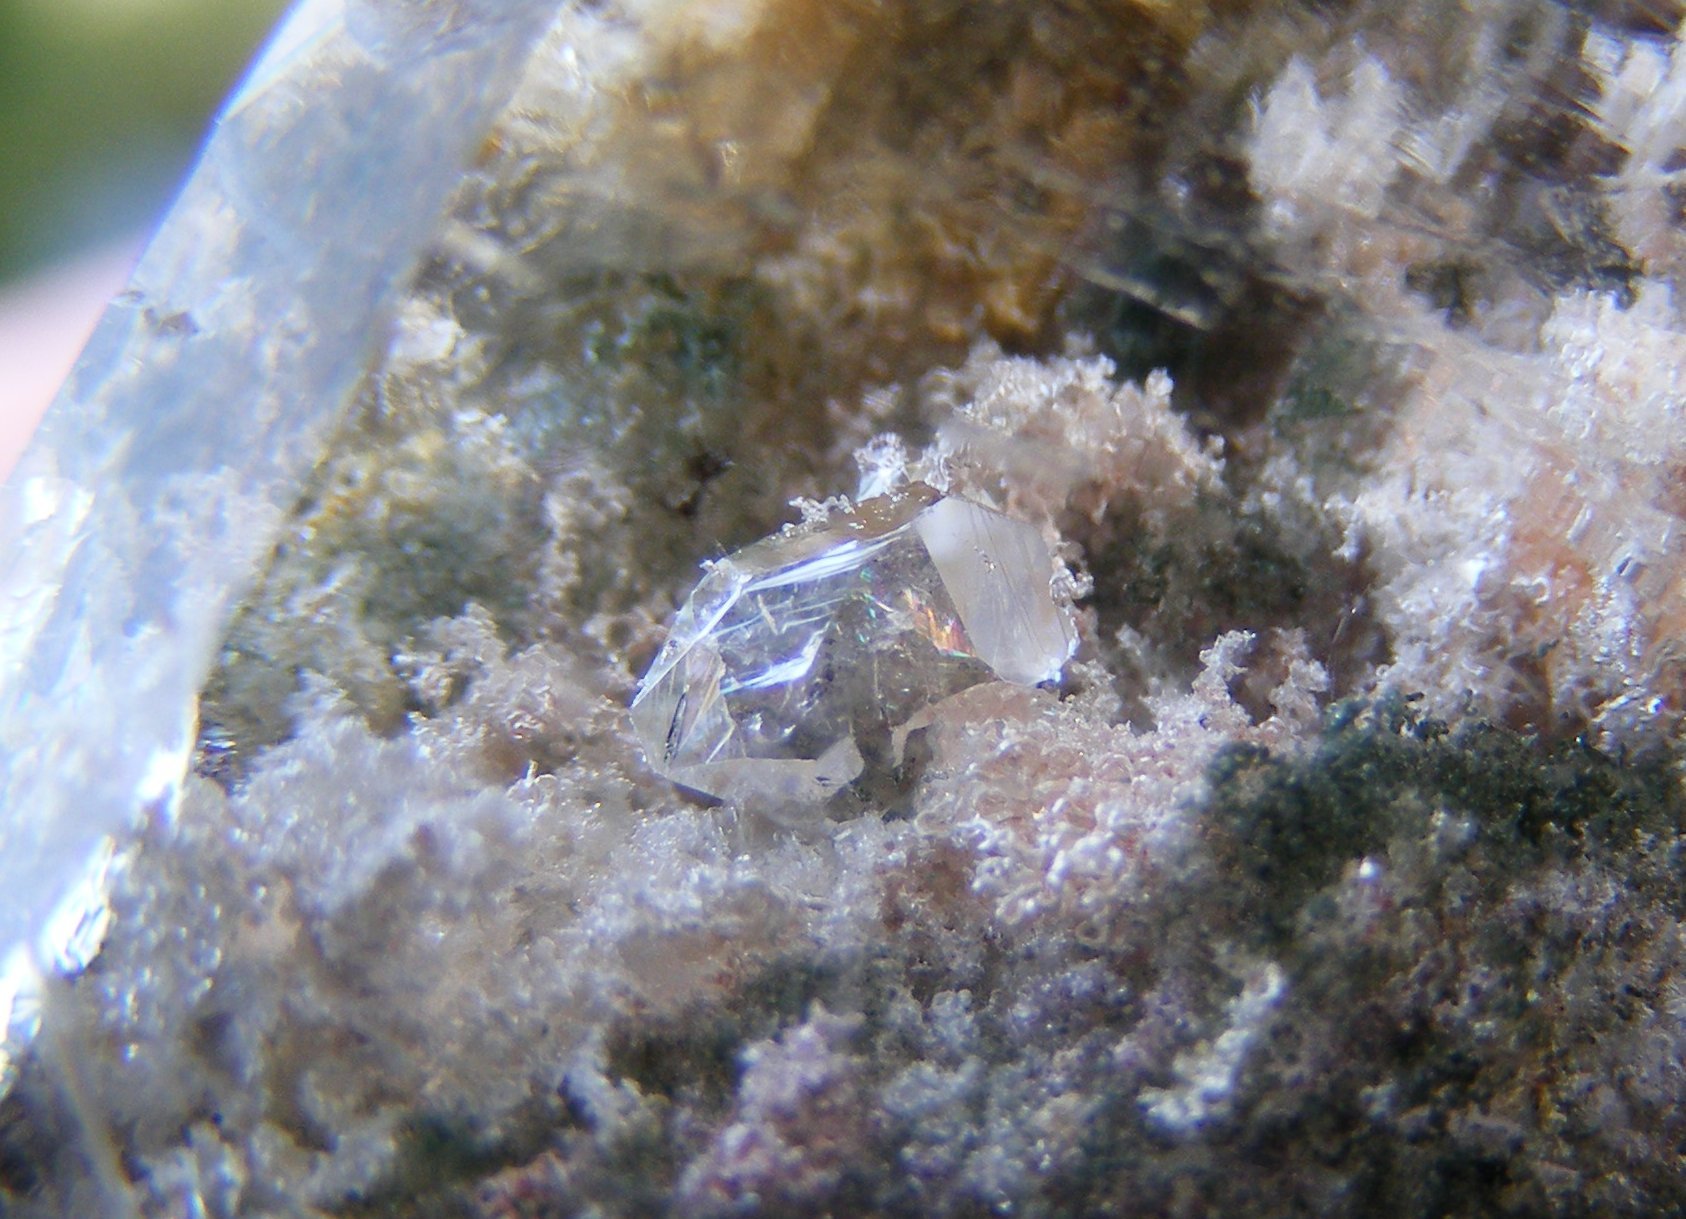 Close-up view of a quartz crystal displaying its hexagonal structure